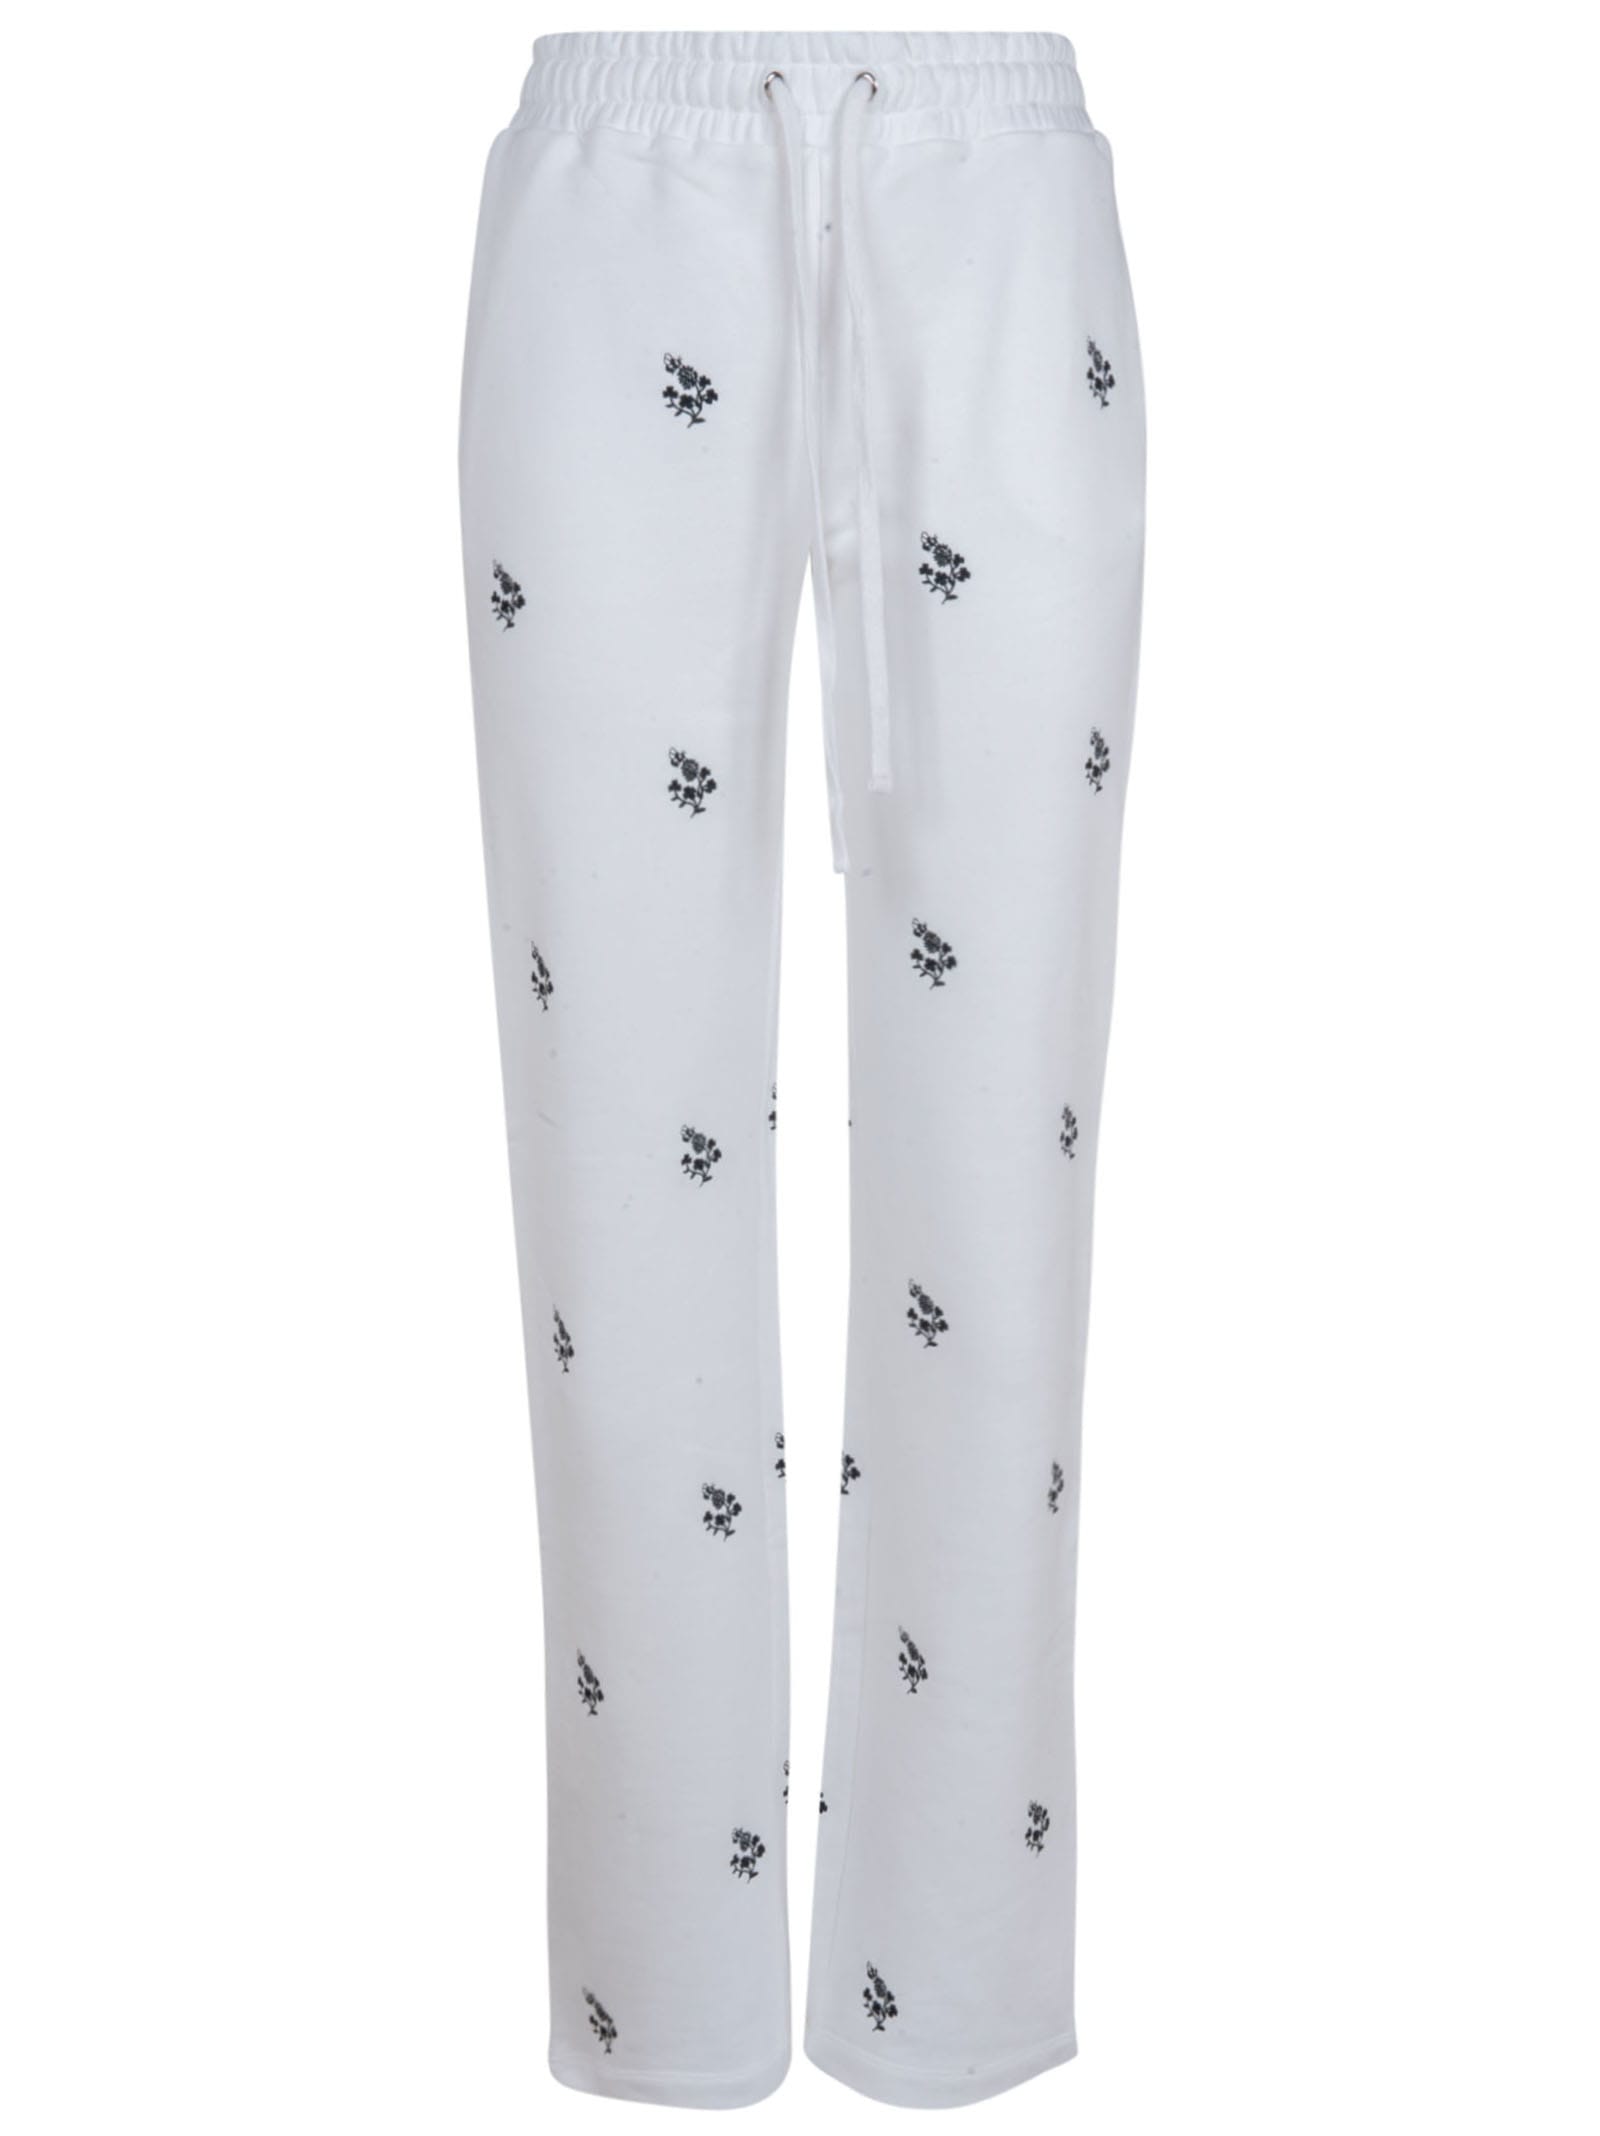 RED Valentino Floral Print Track Pants